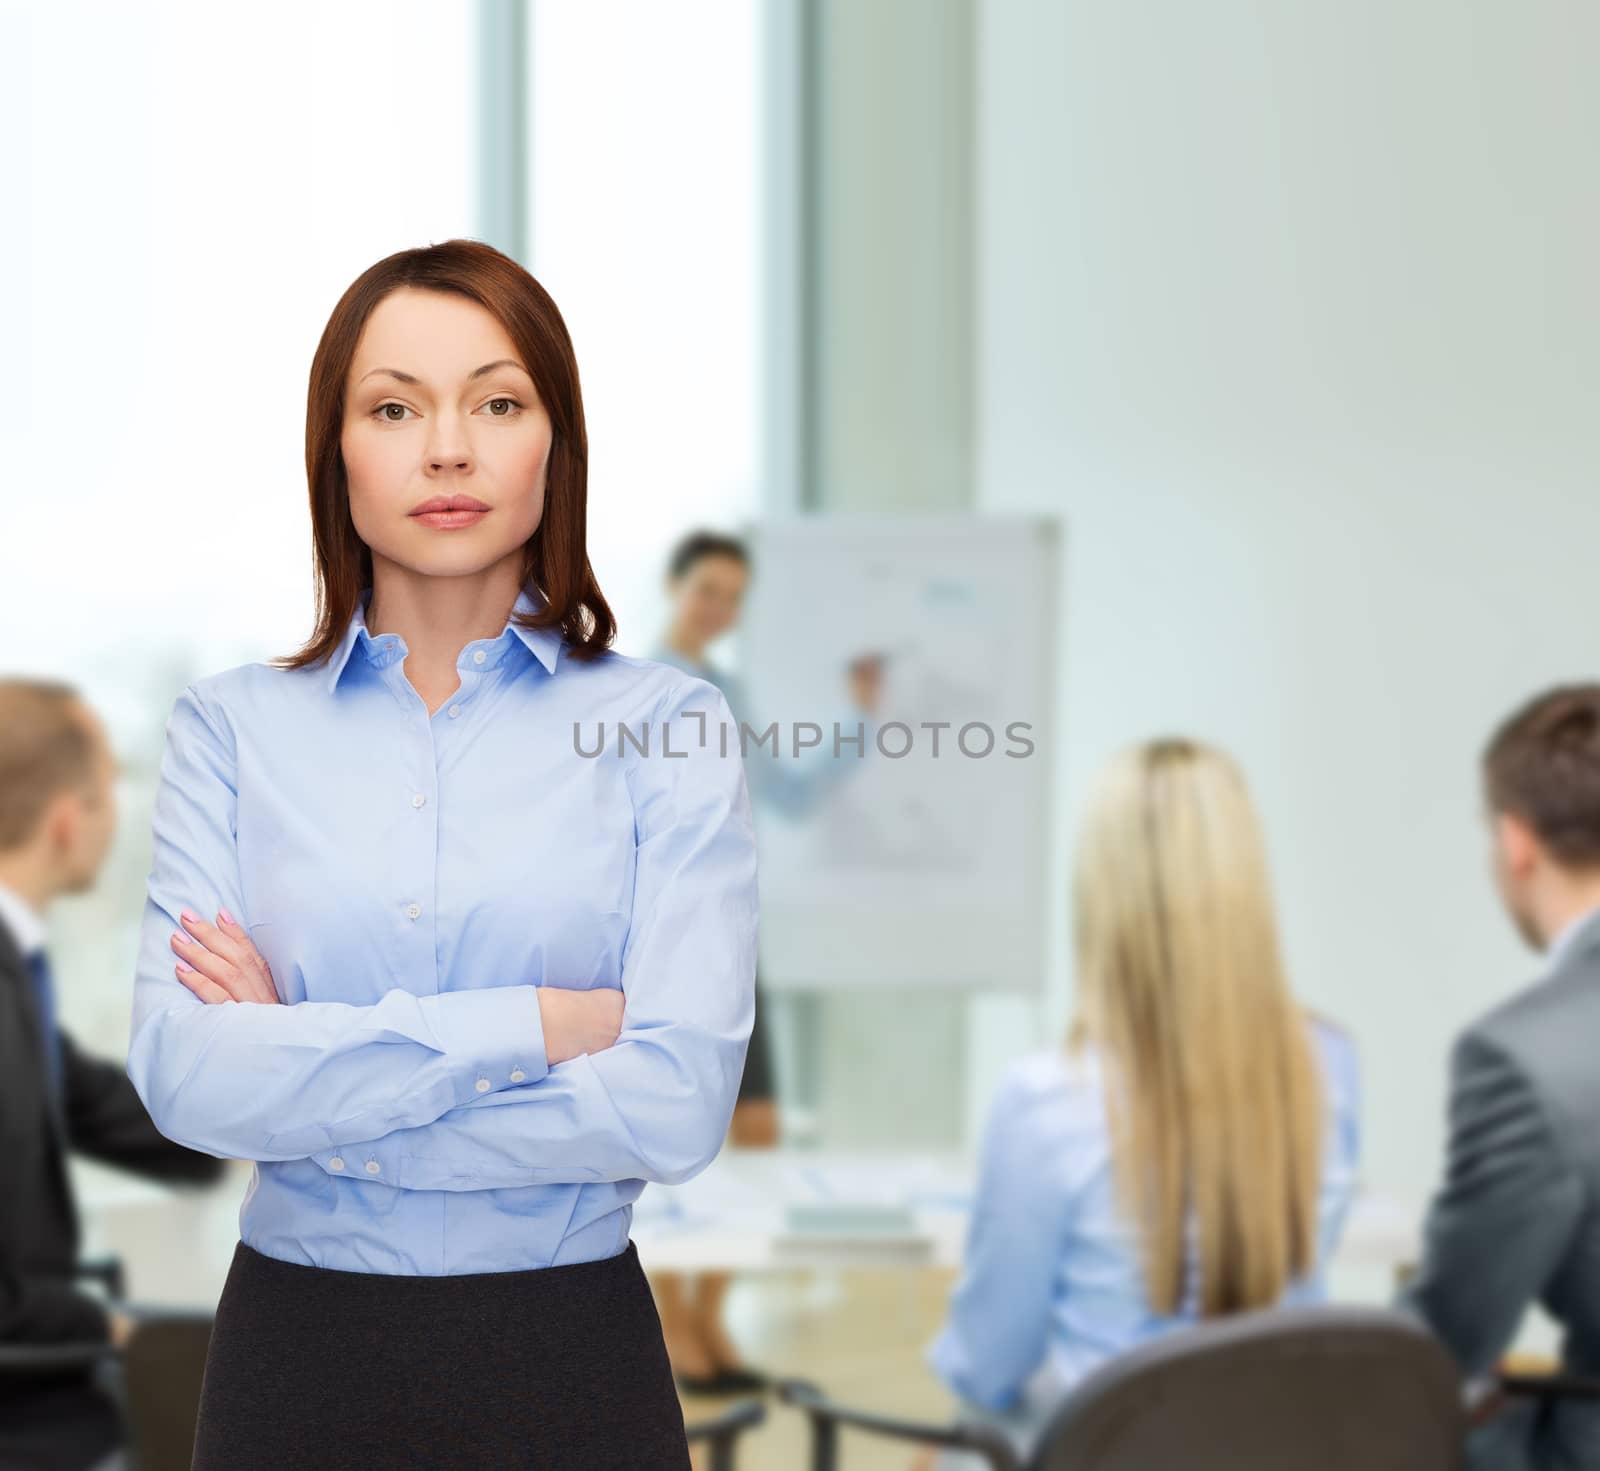 business and education concept - friendly young businesswoman with crossed arms at office